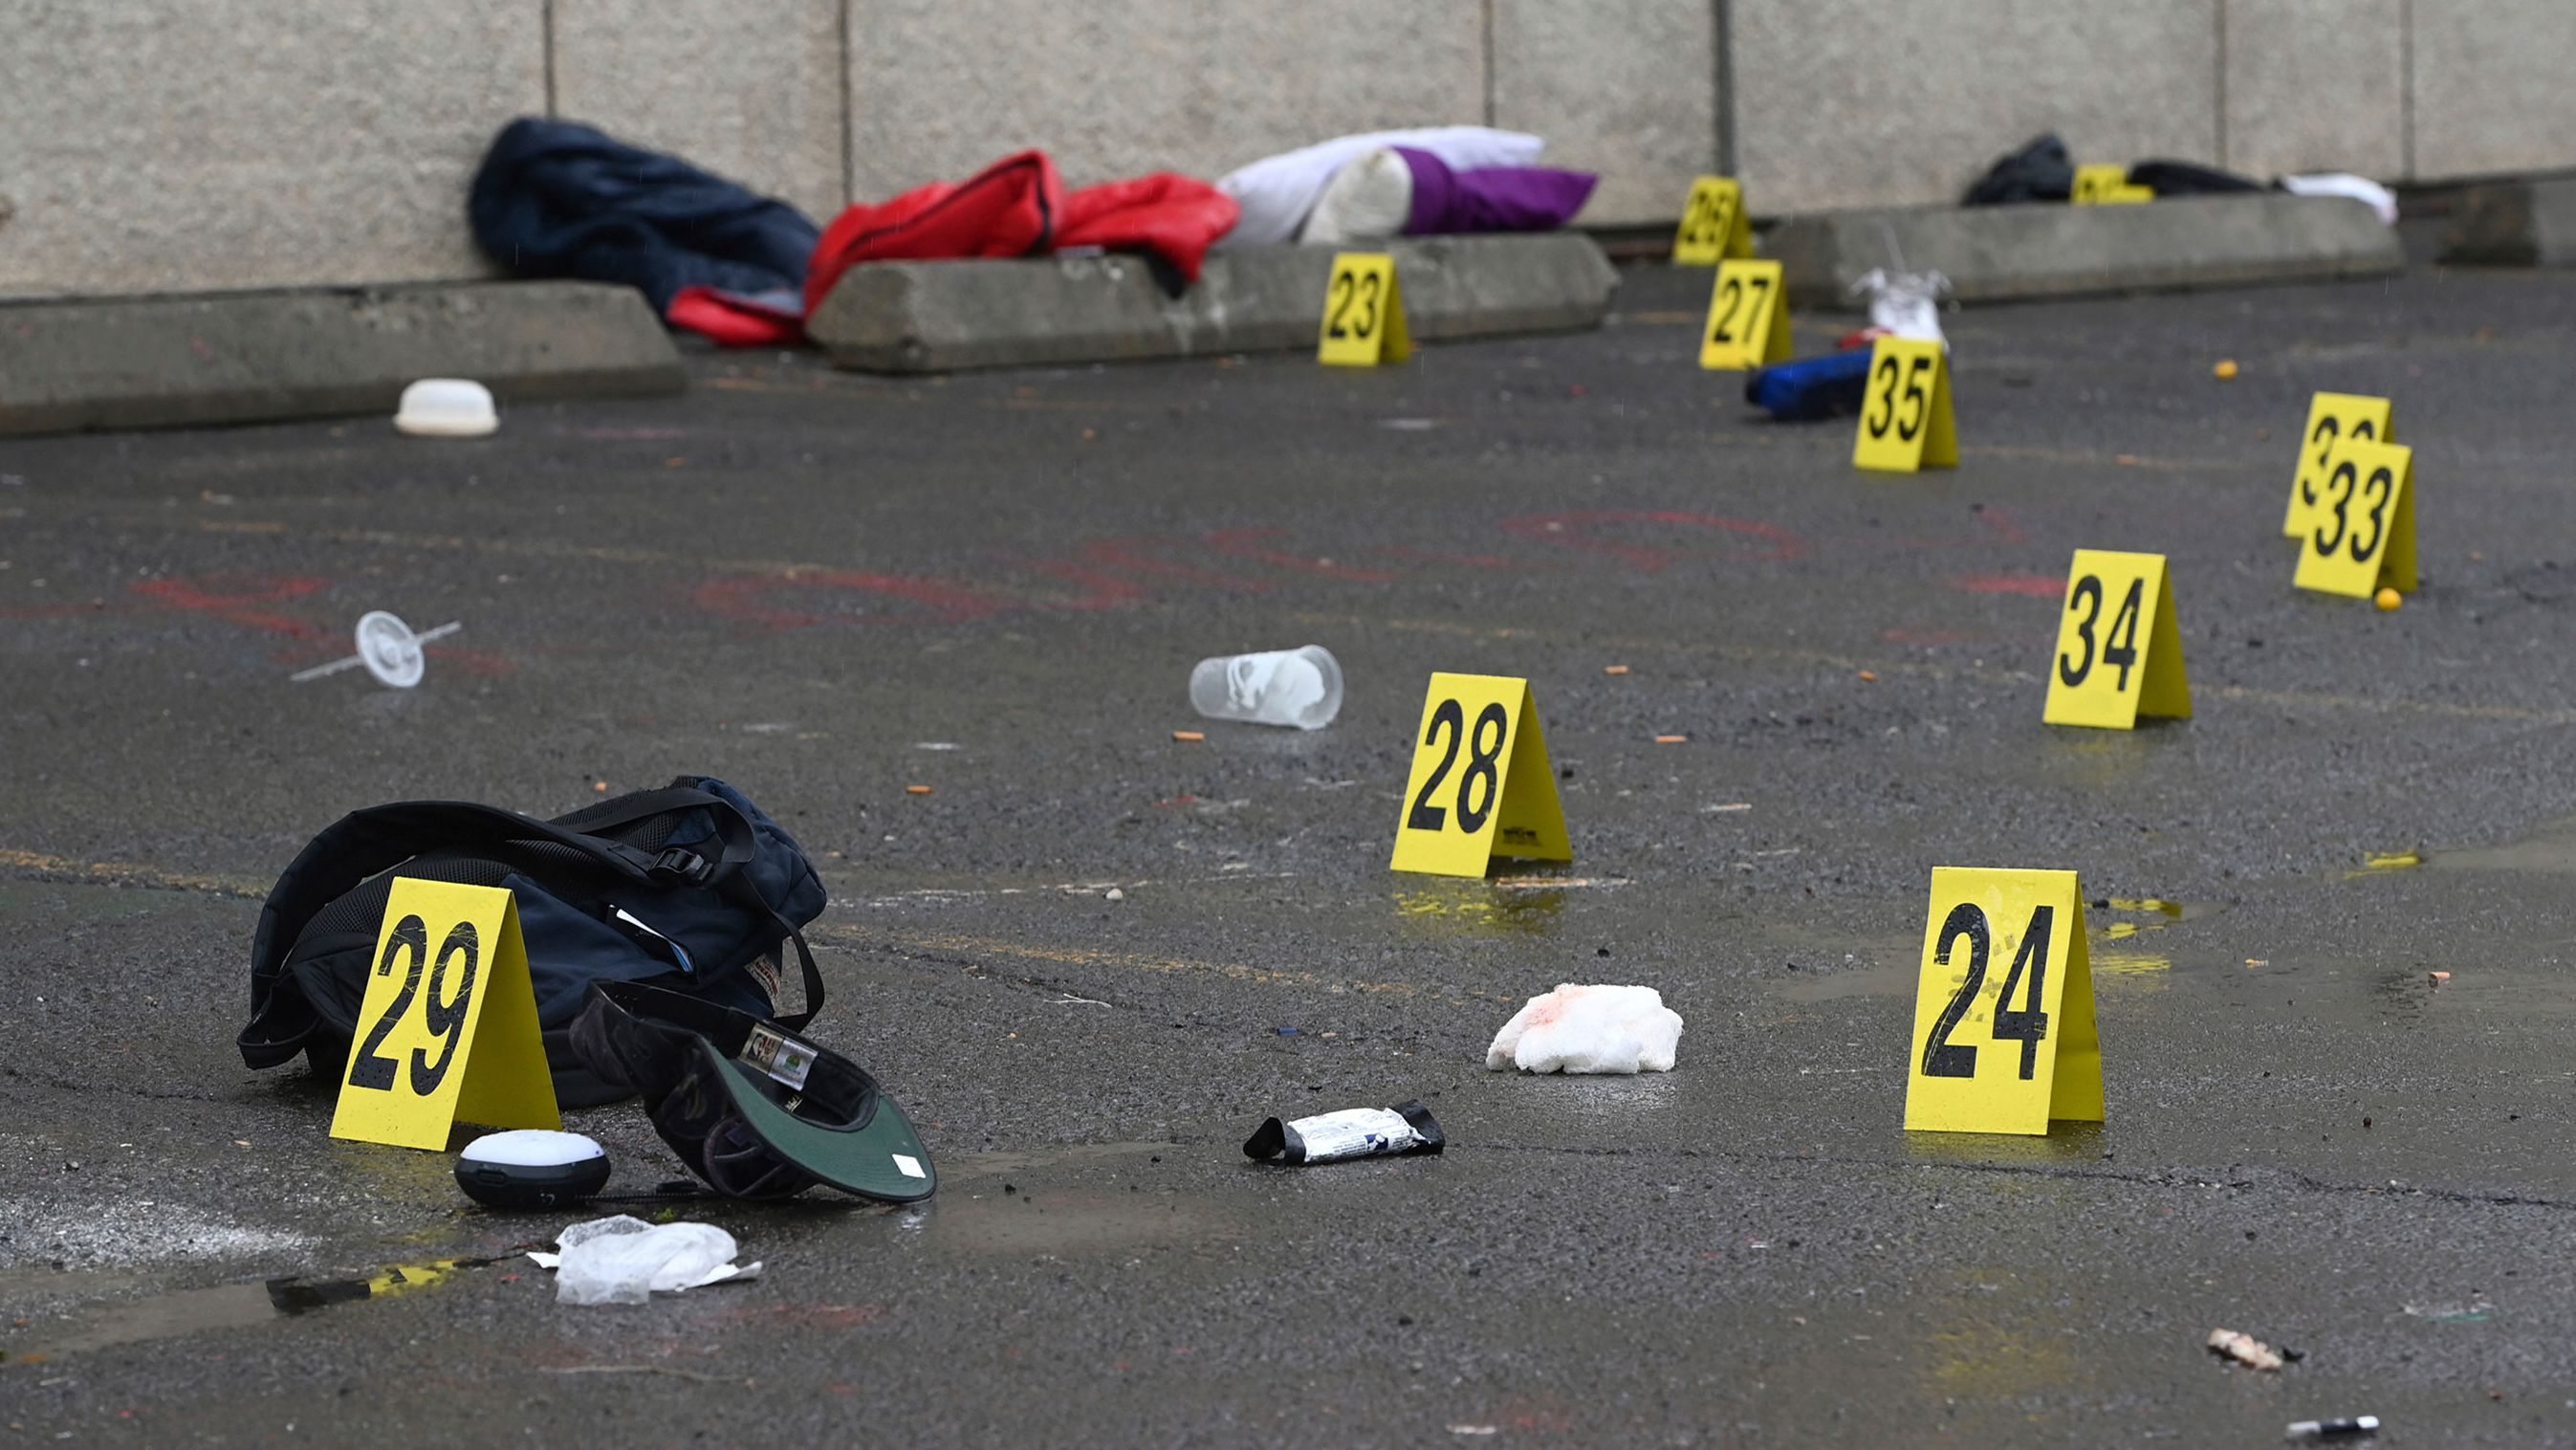 Police are investigating a shooting that left one dead and four injured in Anchorage Saturday. It's one of at least ten mass shootings across the US this weekend.